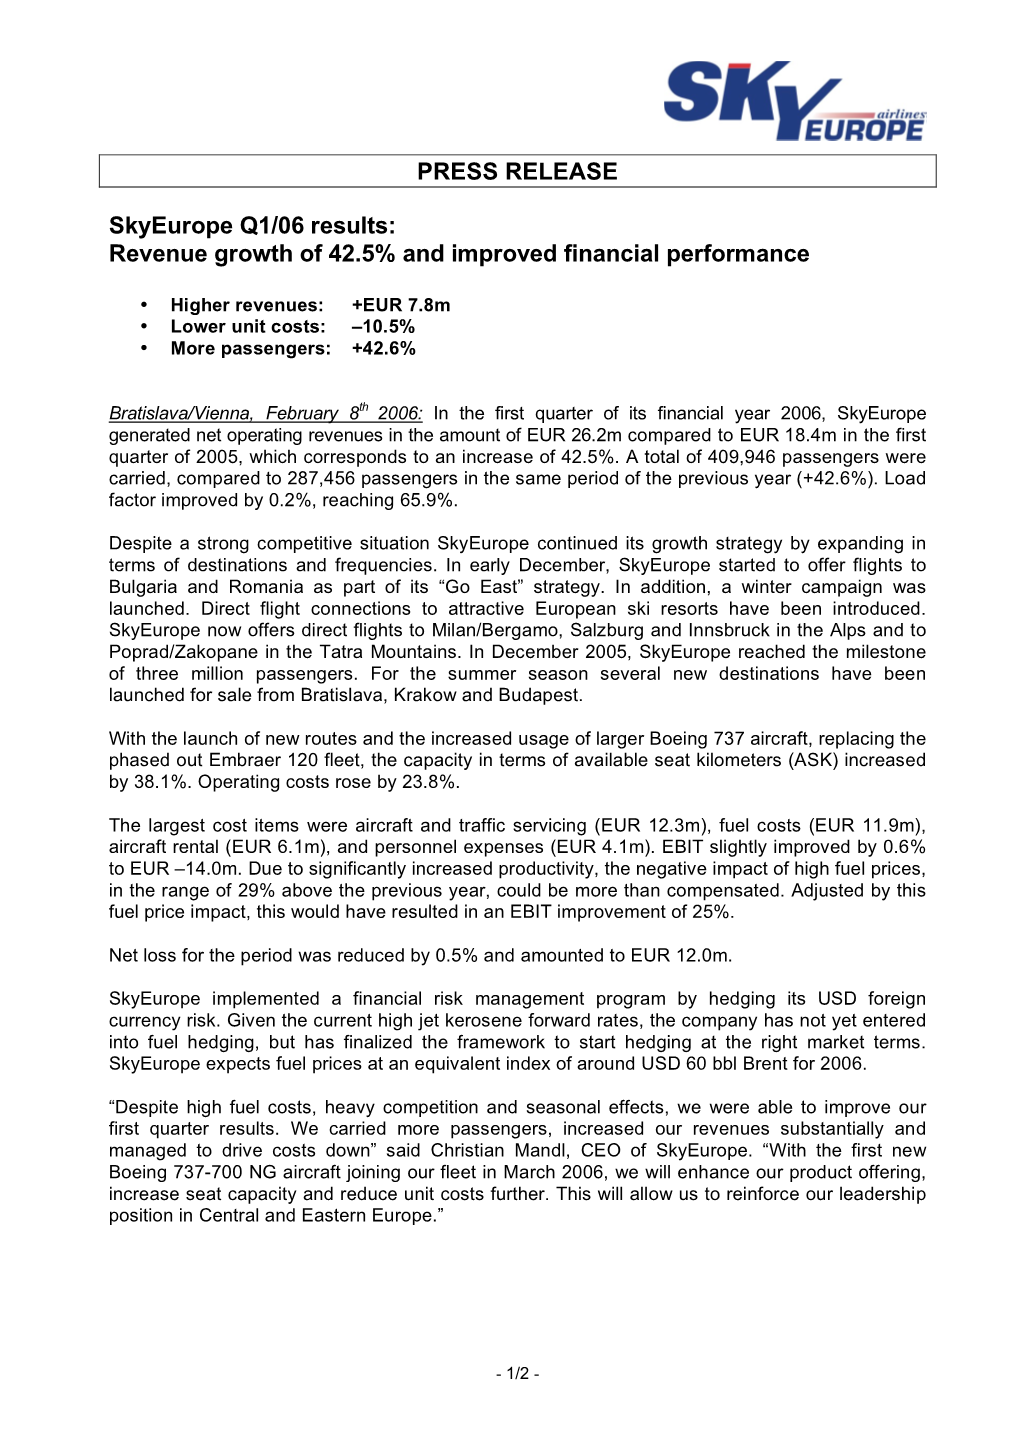 PRESS RELEASE Skyeurope Q1/06 Results: Revenue Growth of 42.5